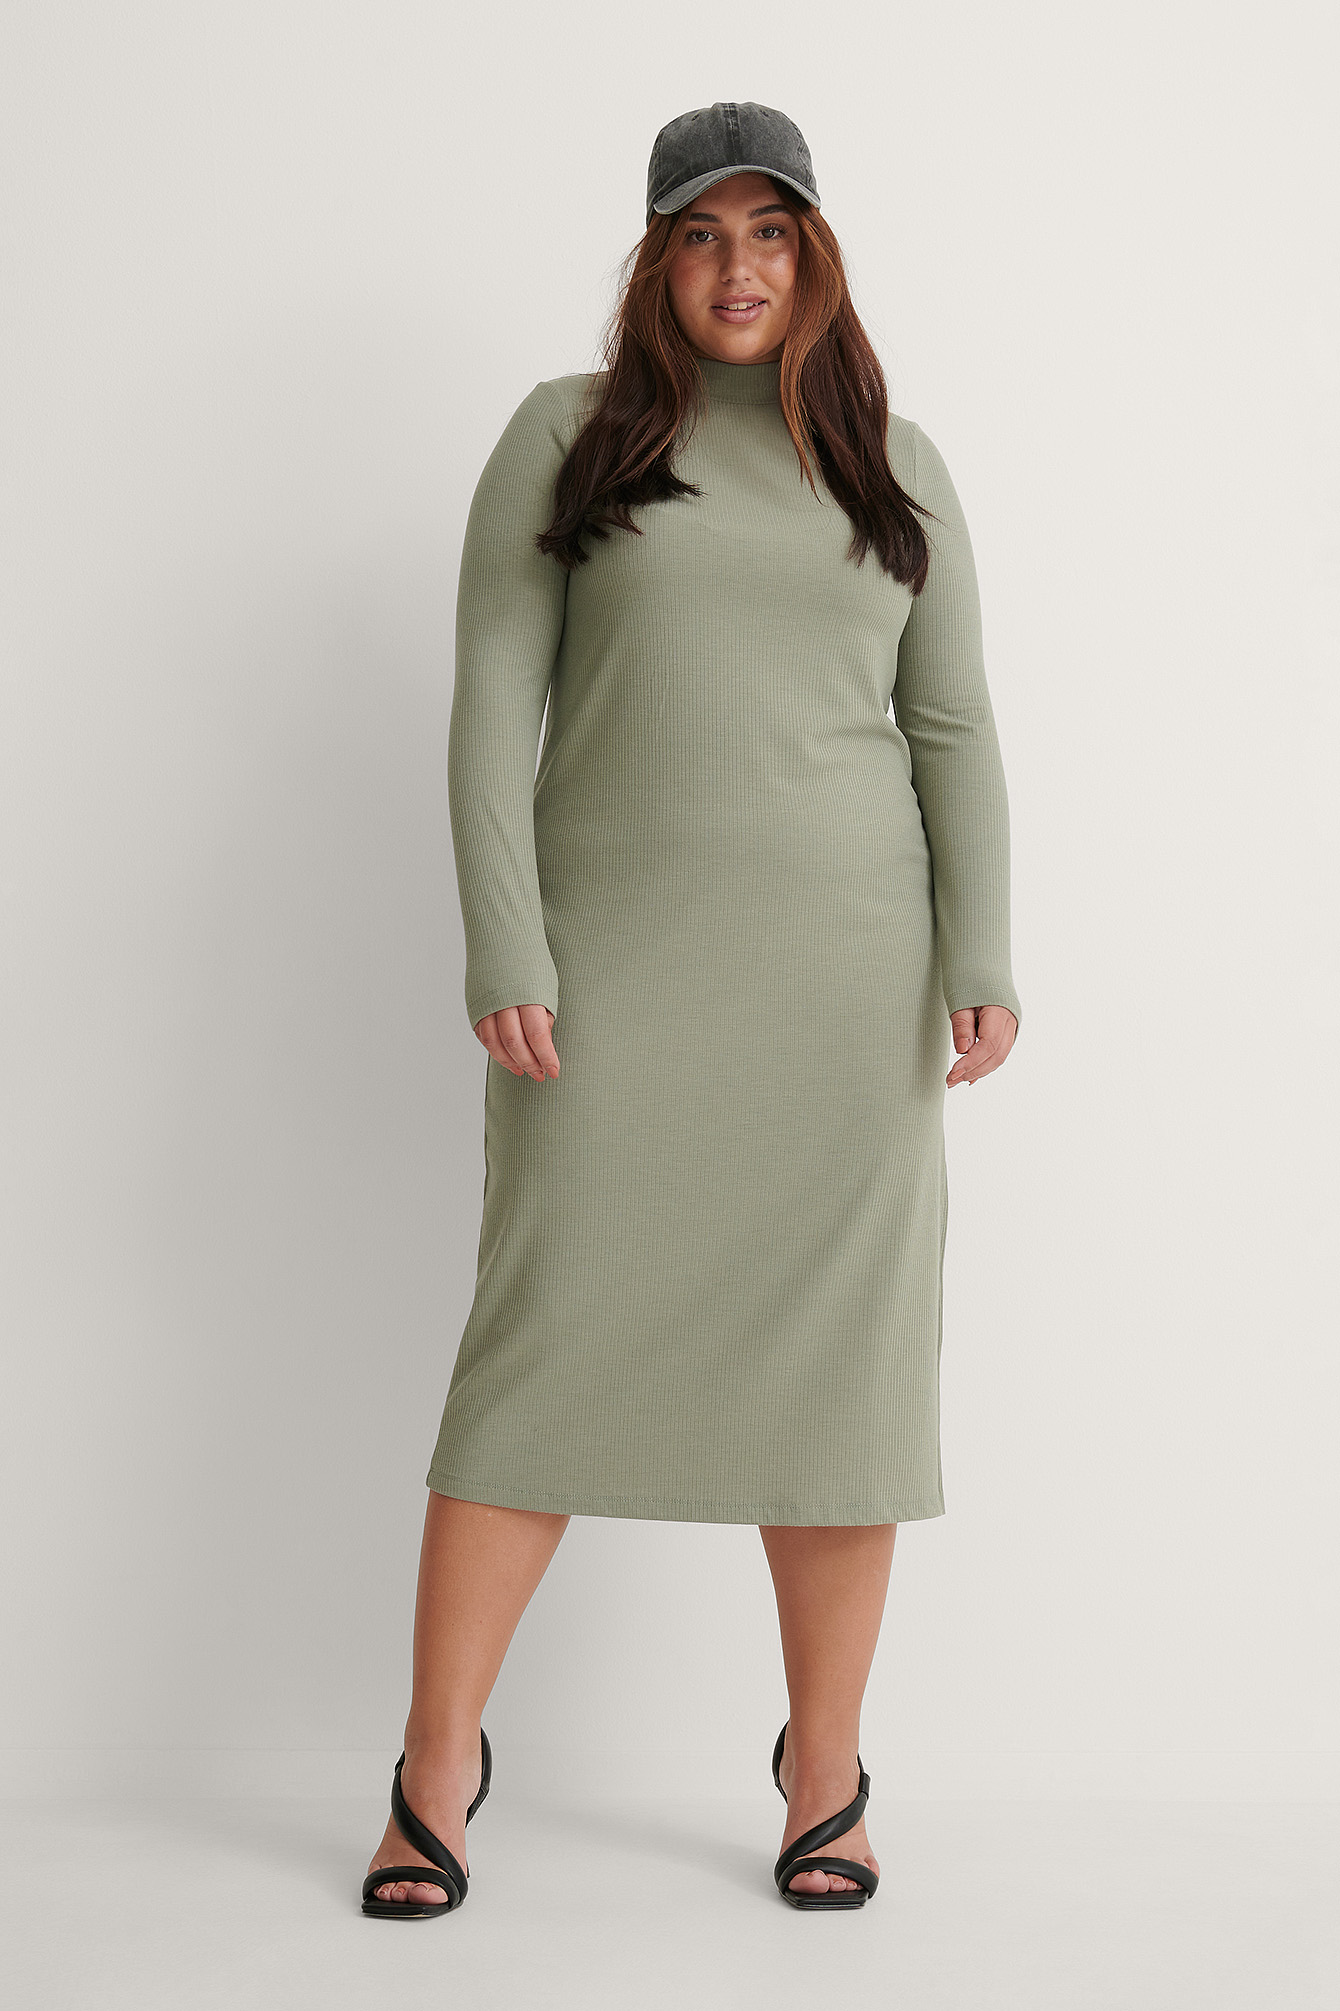 High Neck Ribbed Basic Long Sleeve Dress Outfit.